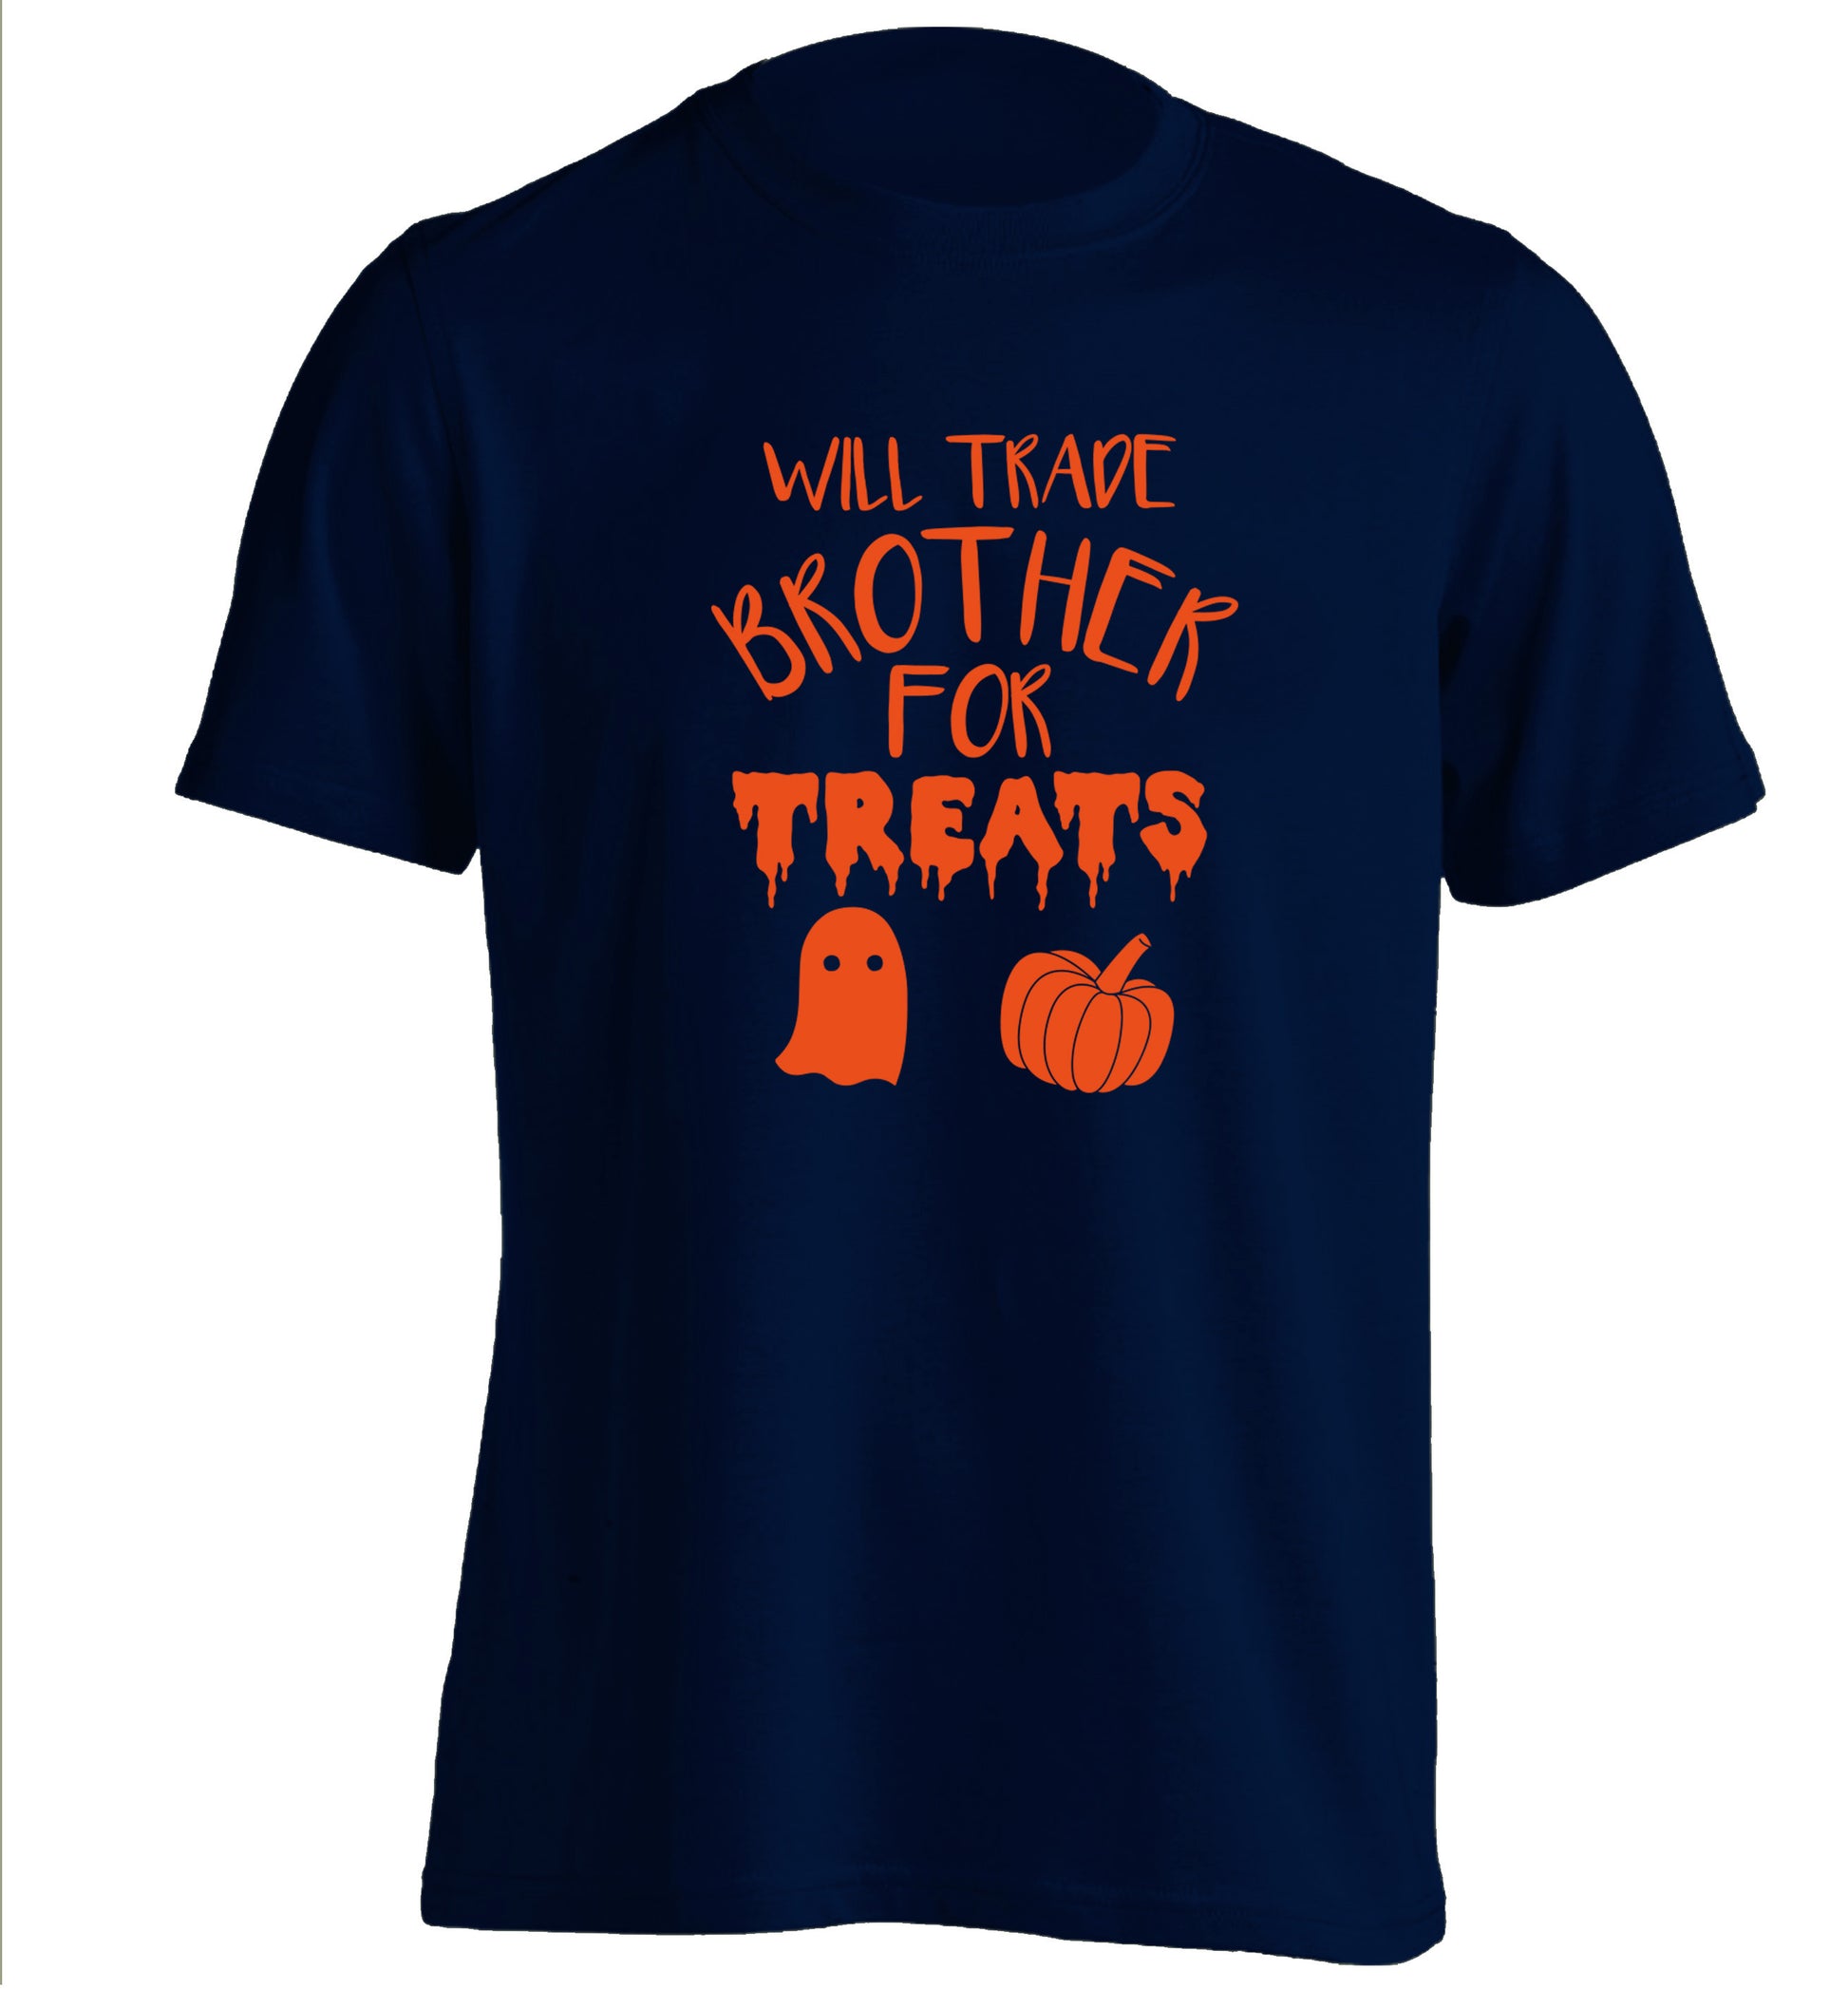 Will trade brother for treats adults unisex navy Tshirt 2XL